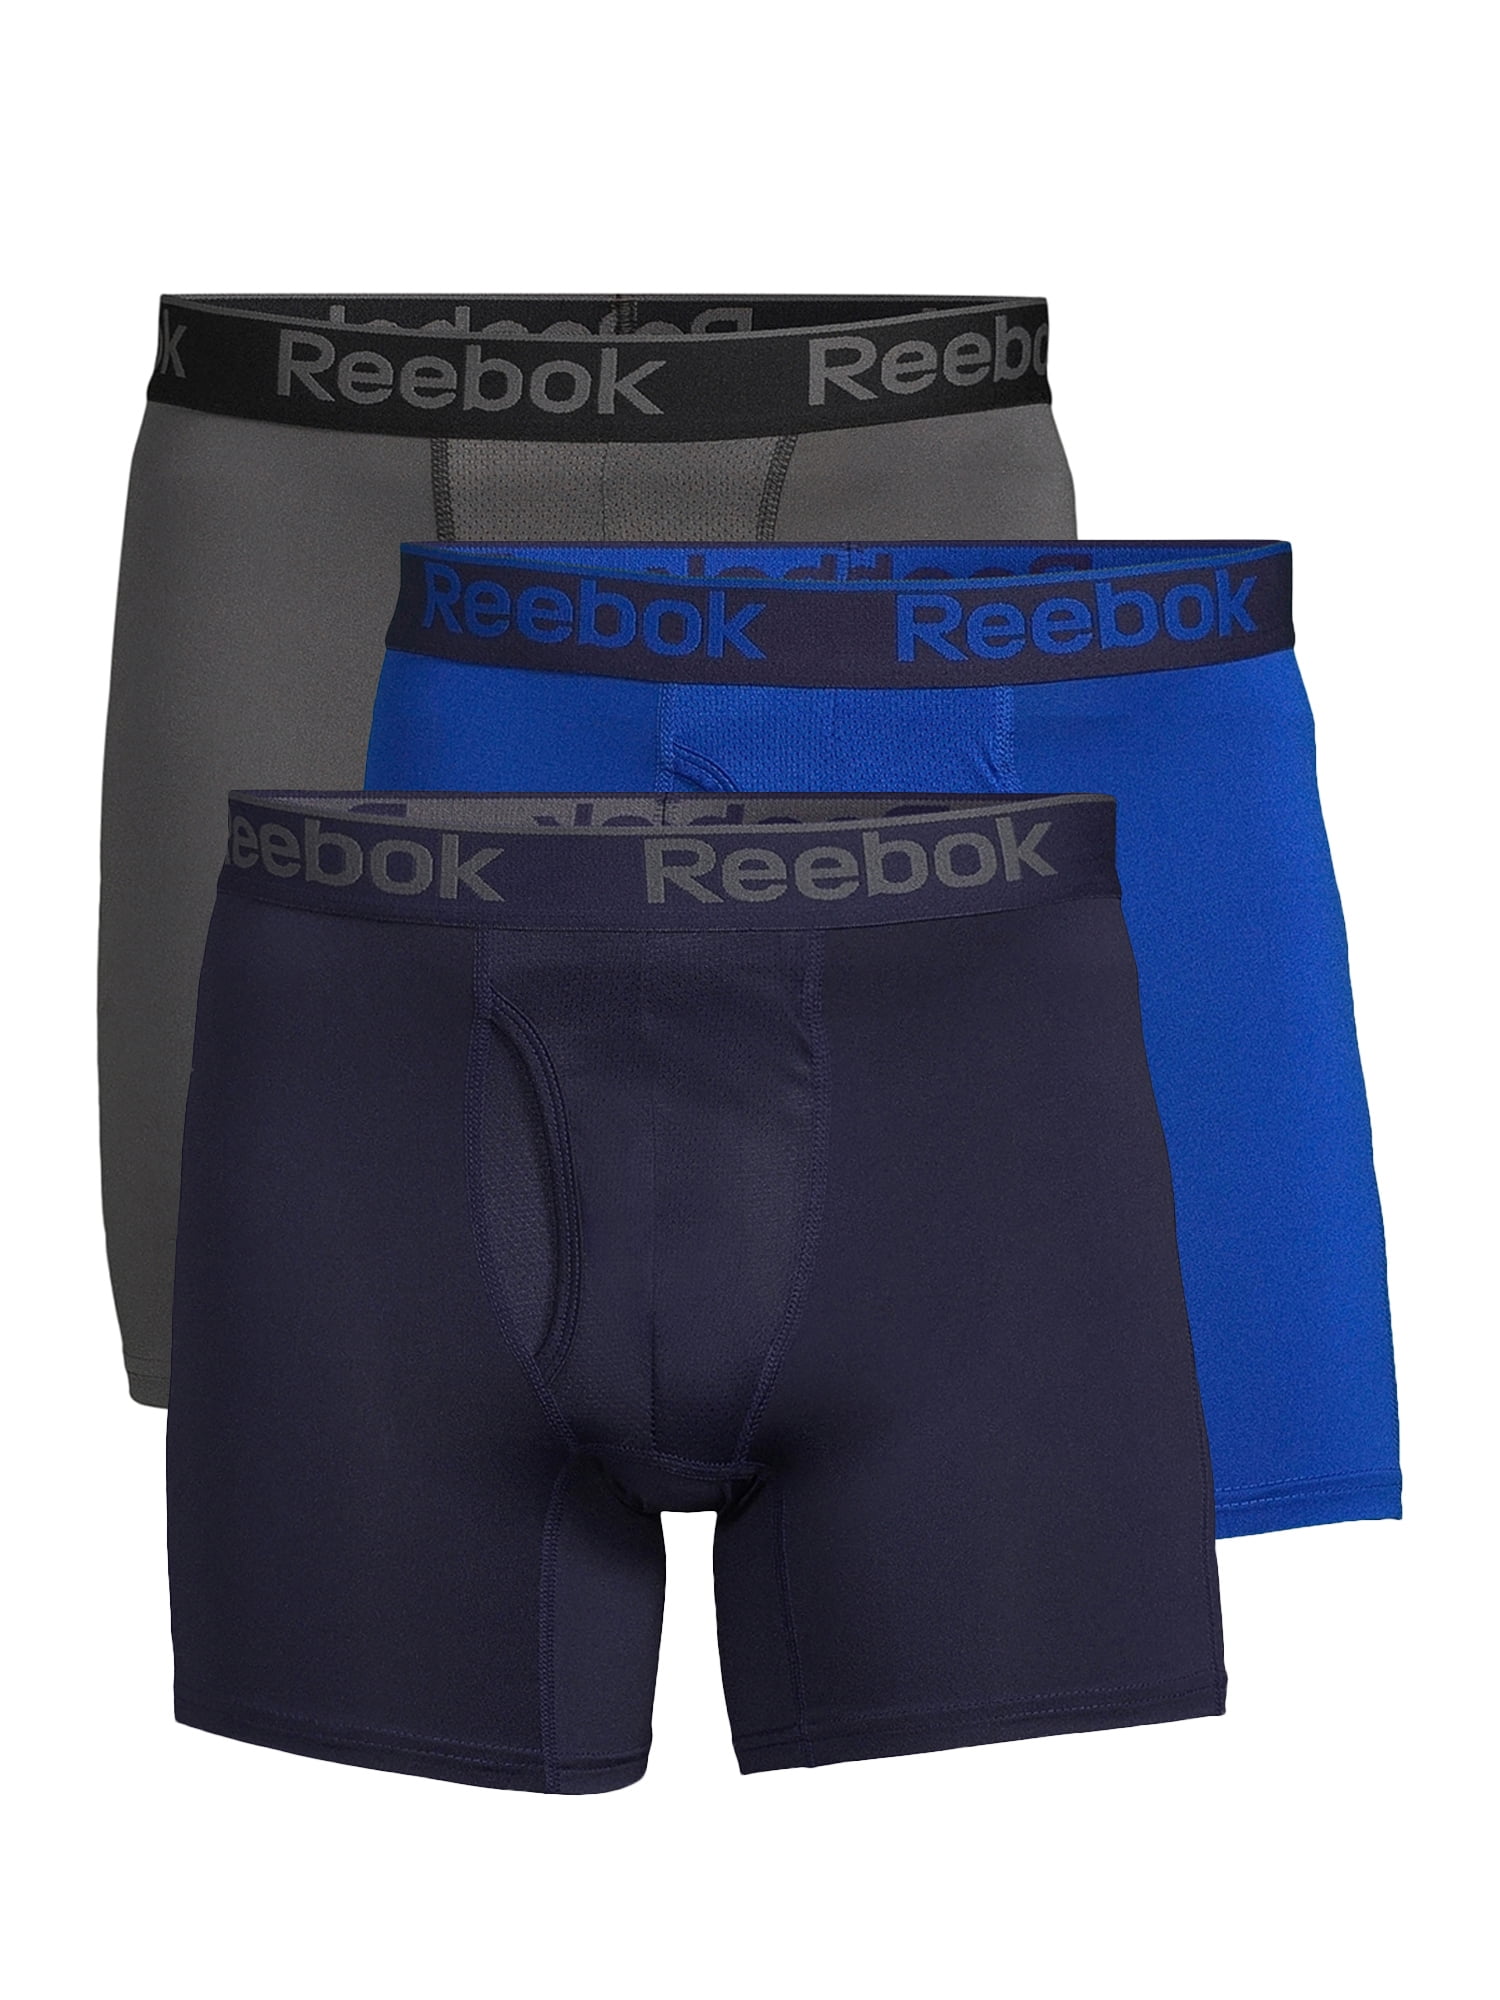 Reebok Boys Performance Quick Dry Compression Long Boxer Brief Pack of ...